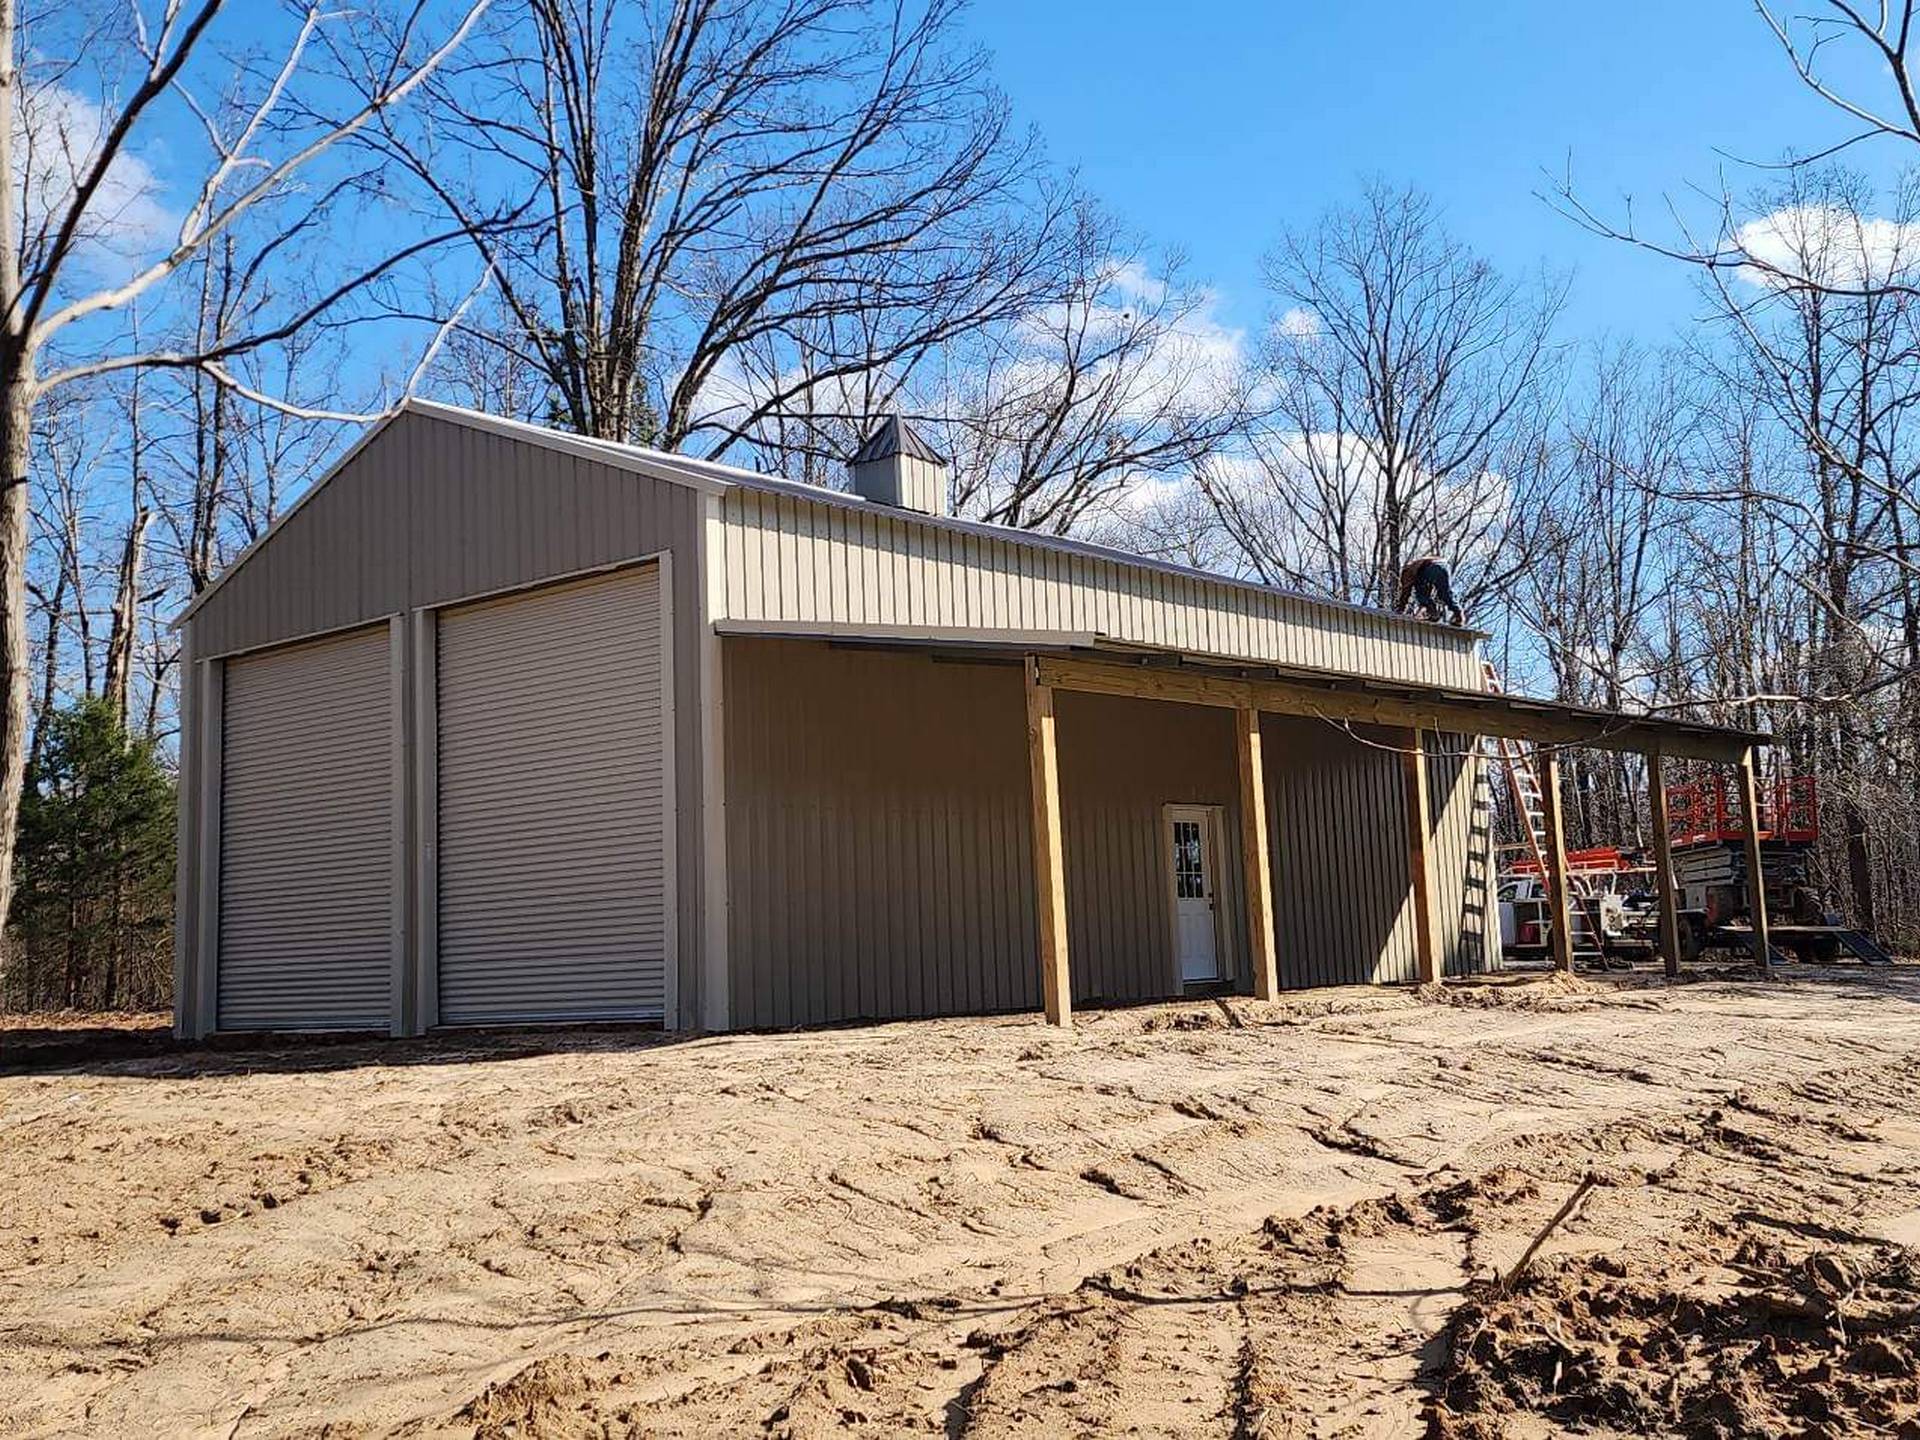 Awnings Cupolas & Lean-Tos - Dudleys Portable Buildings in Alabama 01